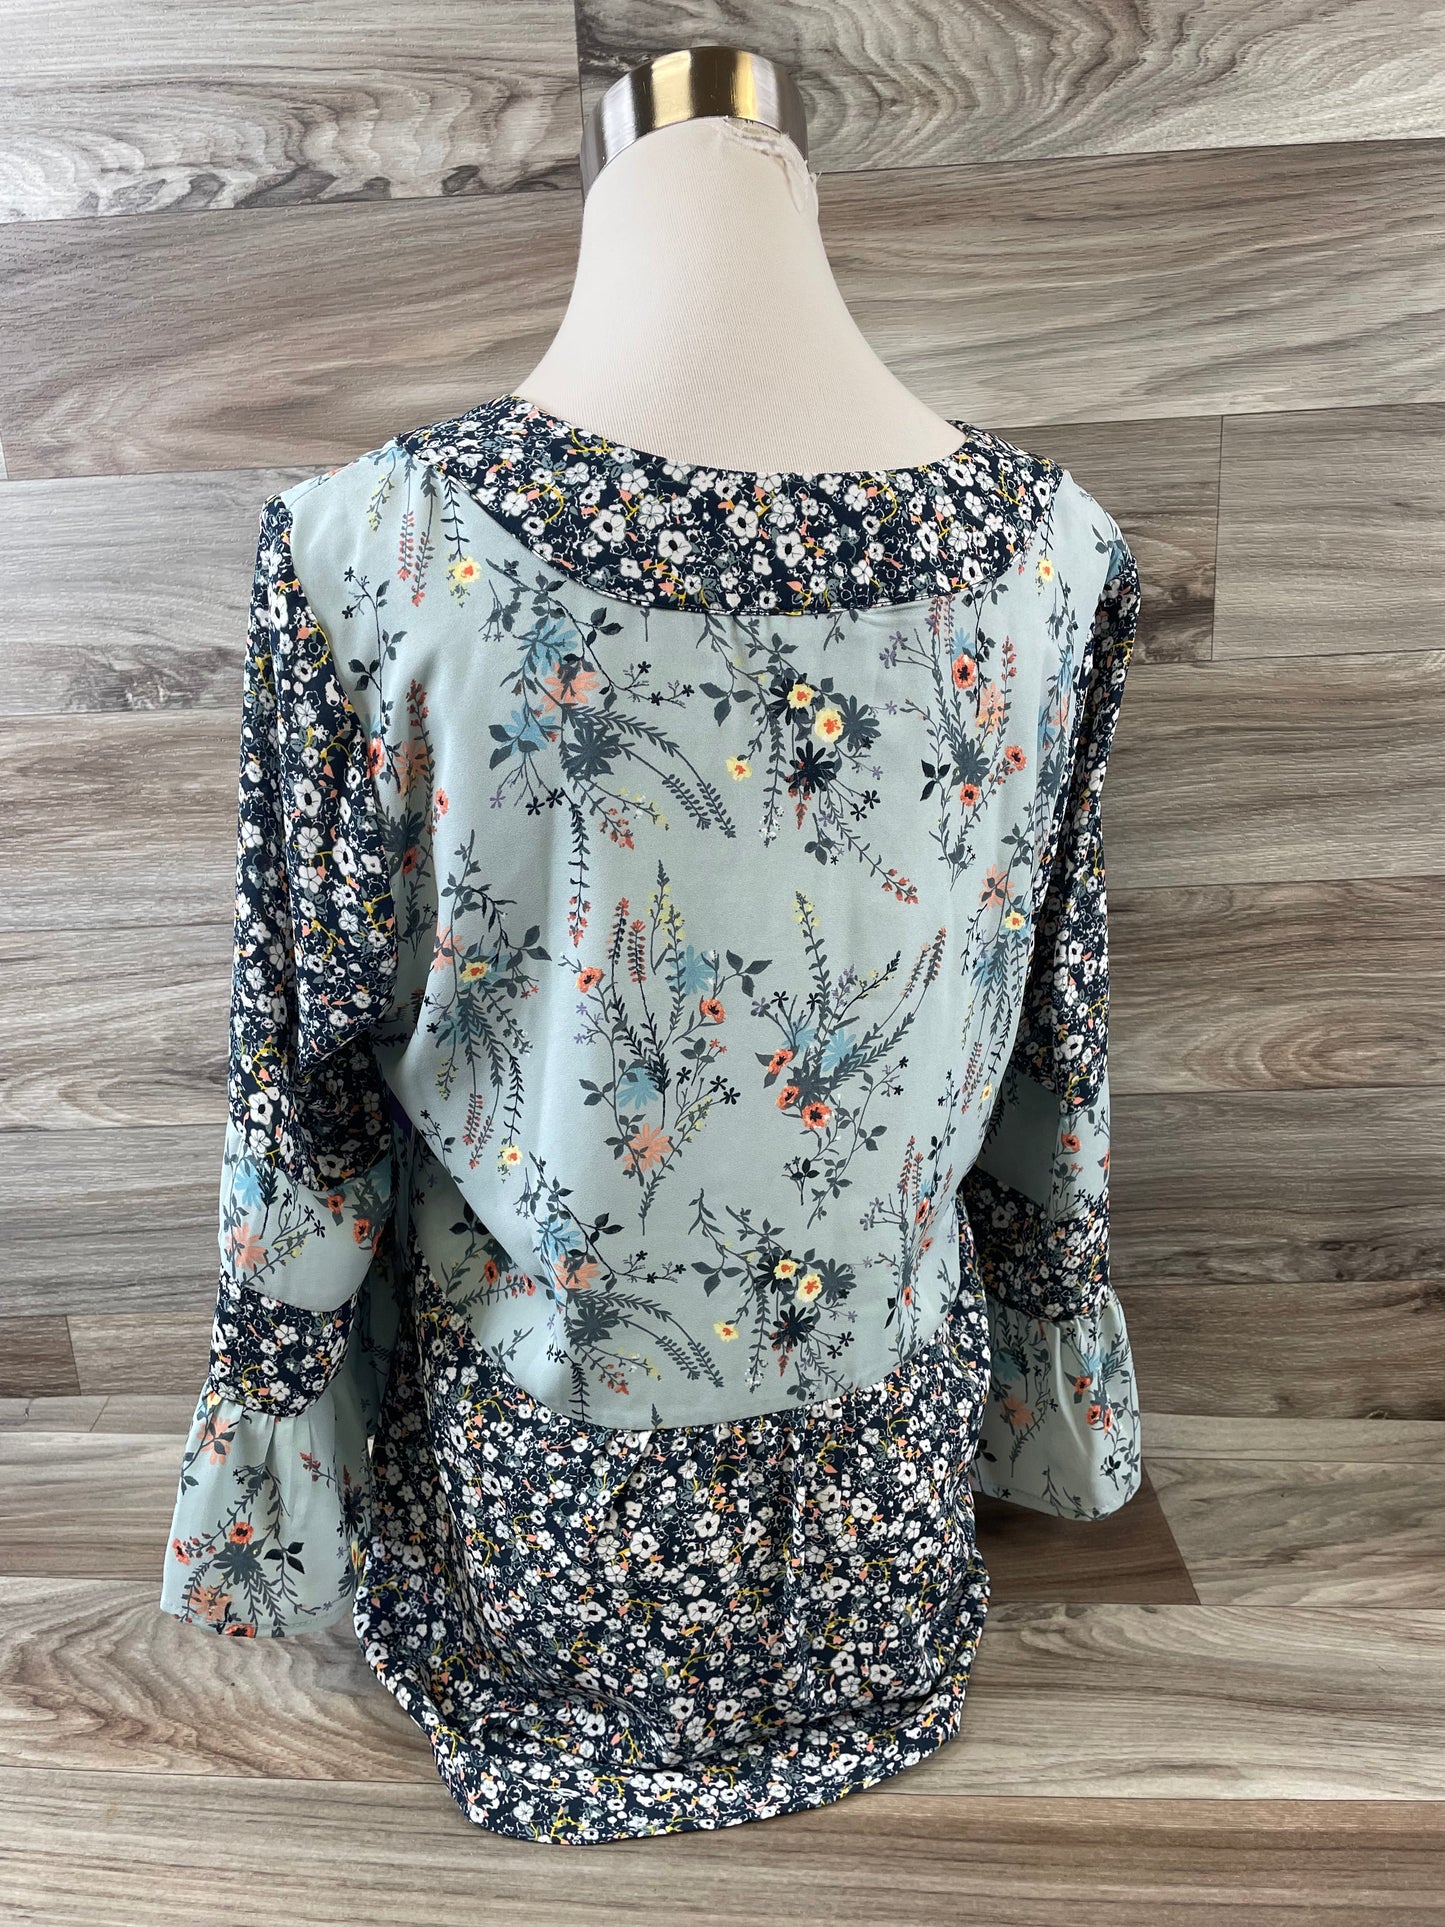 Floral Print Top 3/4 Sleeve Basic Dr2, Size M